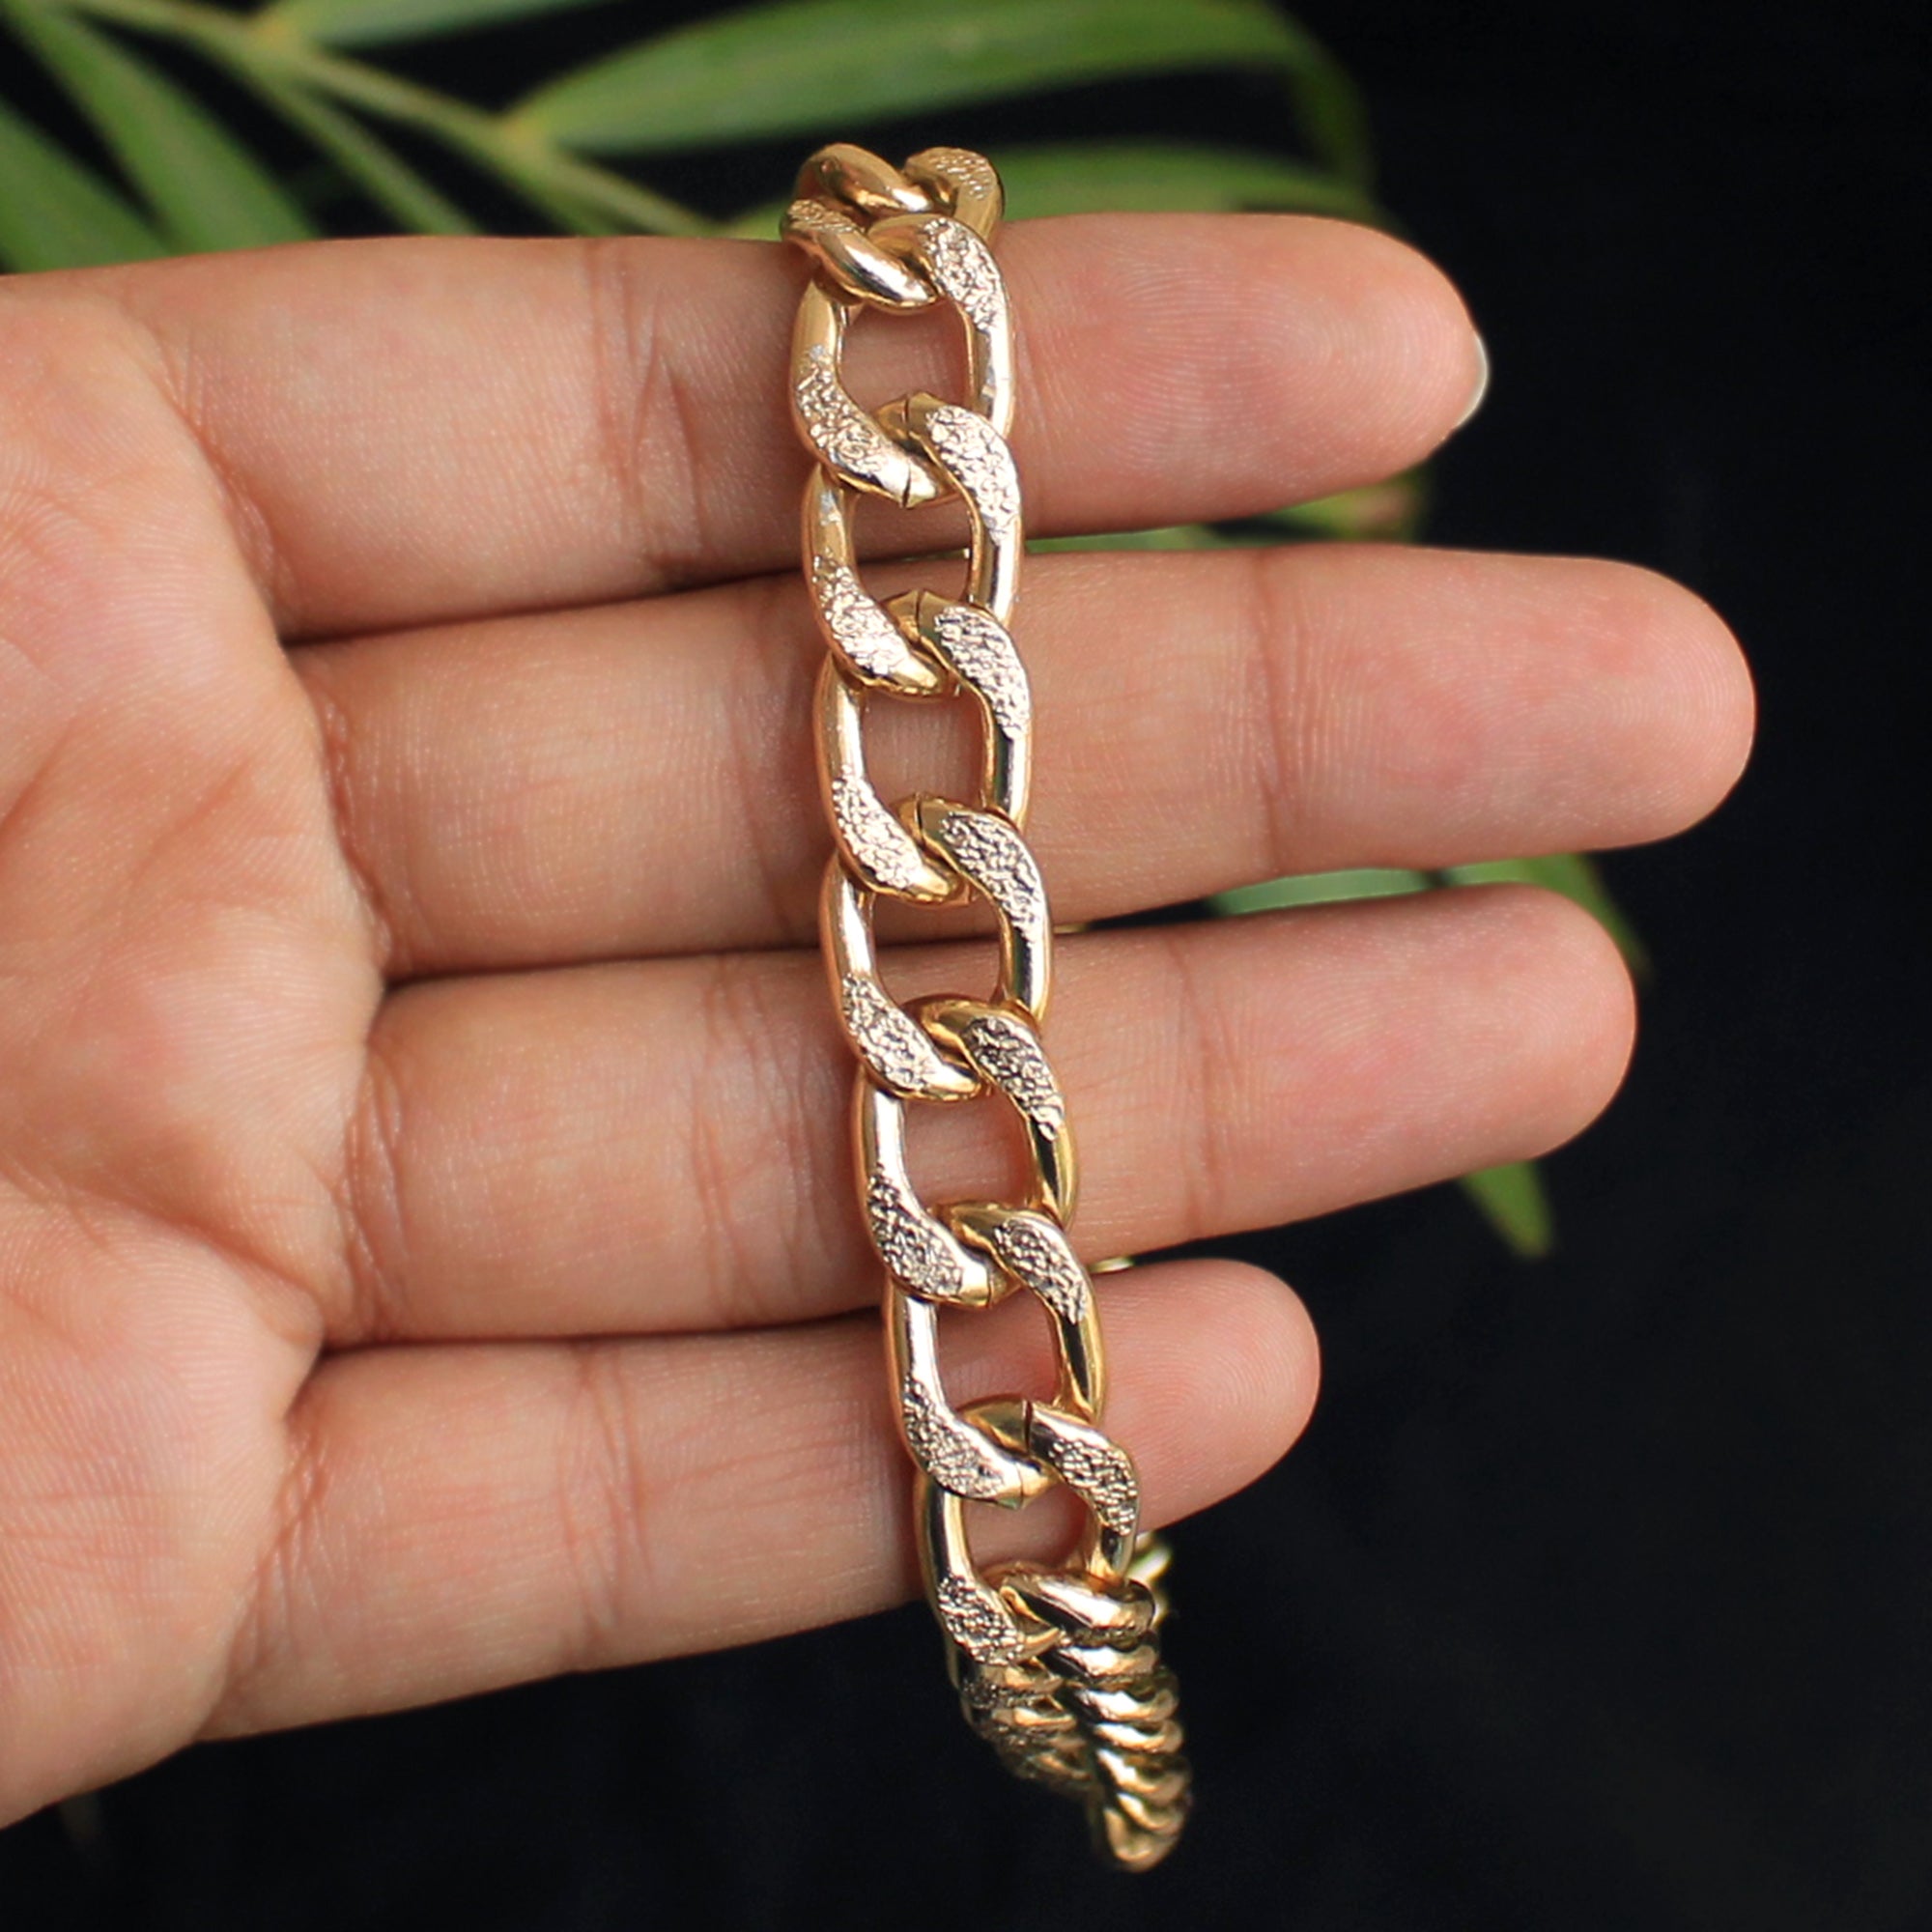 Curb Chain Choker Necklace